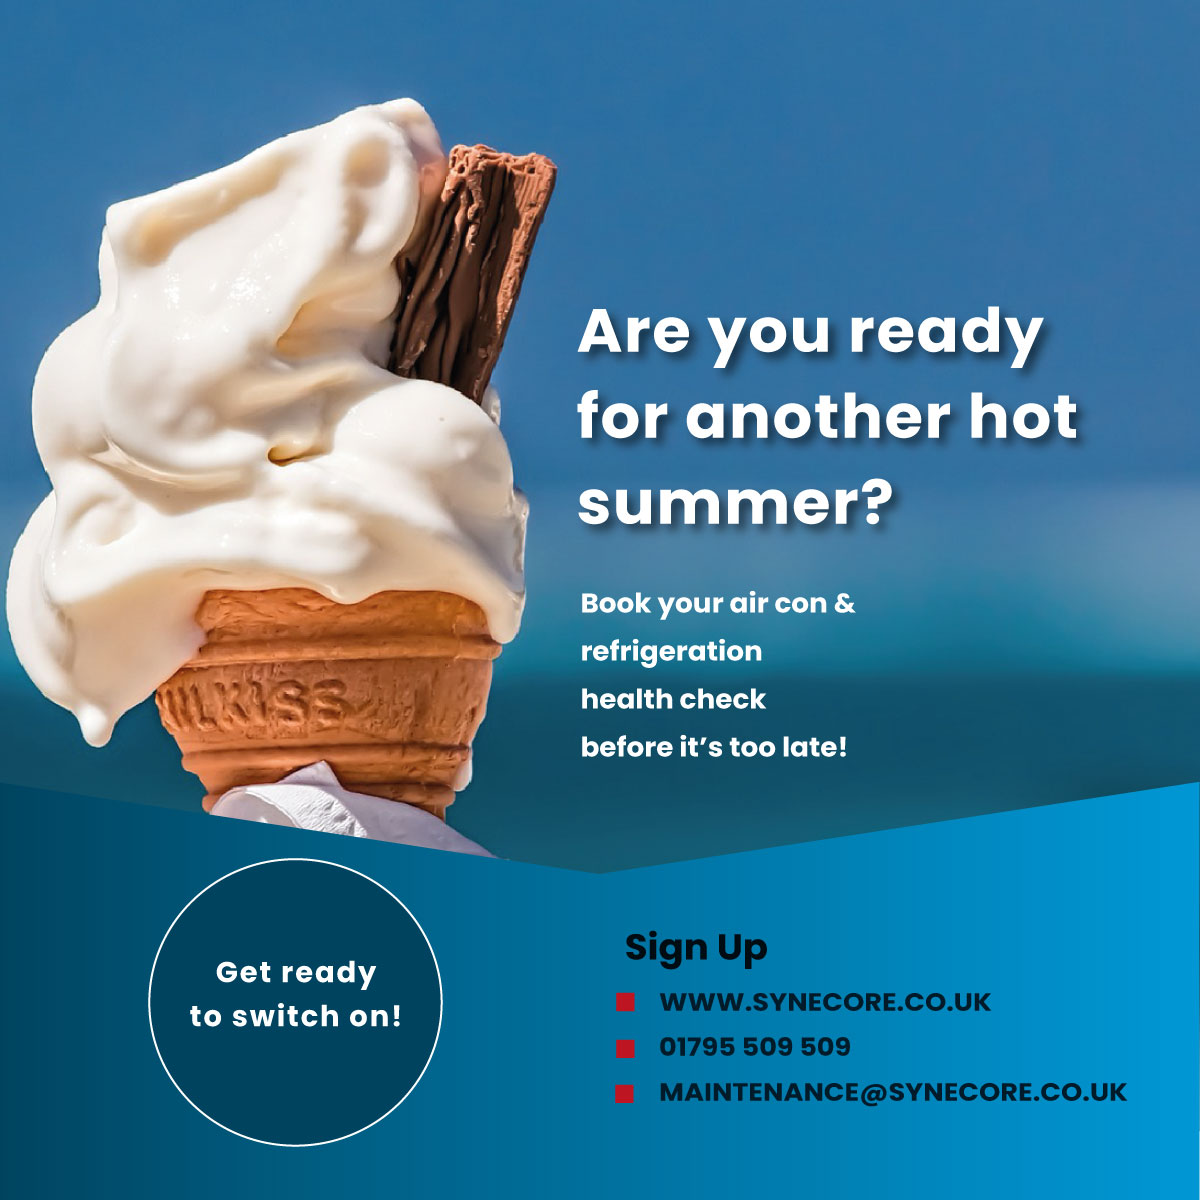 When your #aircon and #refrigeration stops working during the peak of #summer ☀️ and you can't get hold of an engineer, you'll wish you signed up to Synecore's #HVAC and Refrigeration PPM service. 😊 Fortunately, it's not too late! Sign up: maintenance@synecore.co.uk.